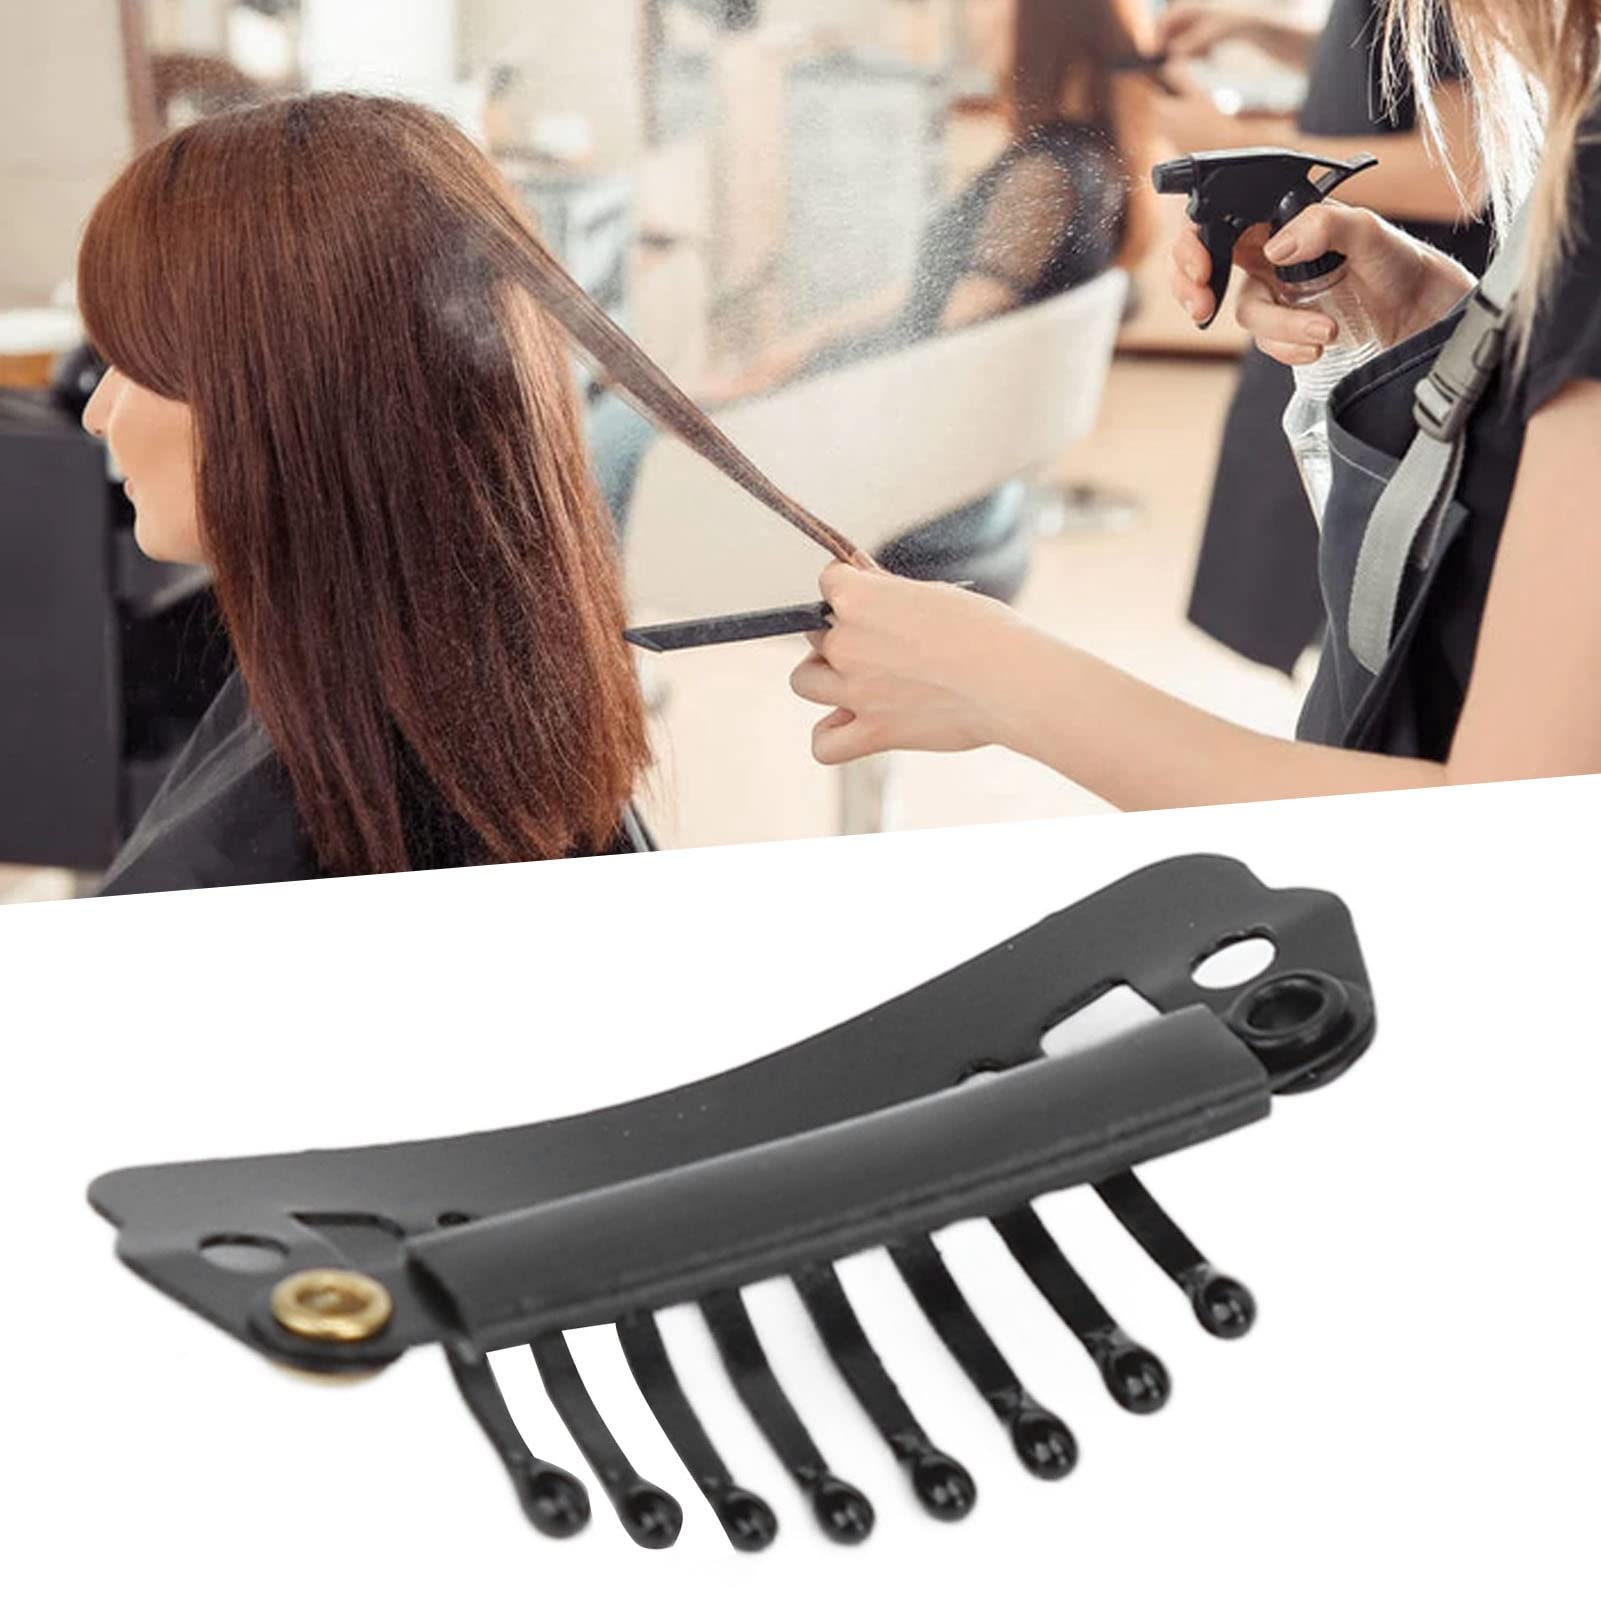 Wig Clips to Secure Wig No Sew,Wig Clips to Secure Wig,Hair Wig Clips Hair Extension Clips Set Stainless Steel DIY 8 Teeth Snap Comb Wig Clips Accessories 1.1in (50pcs)(black)